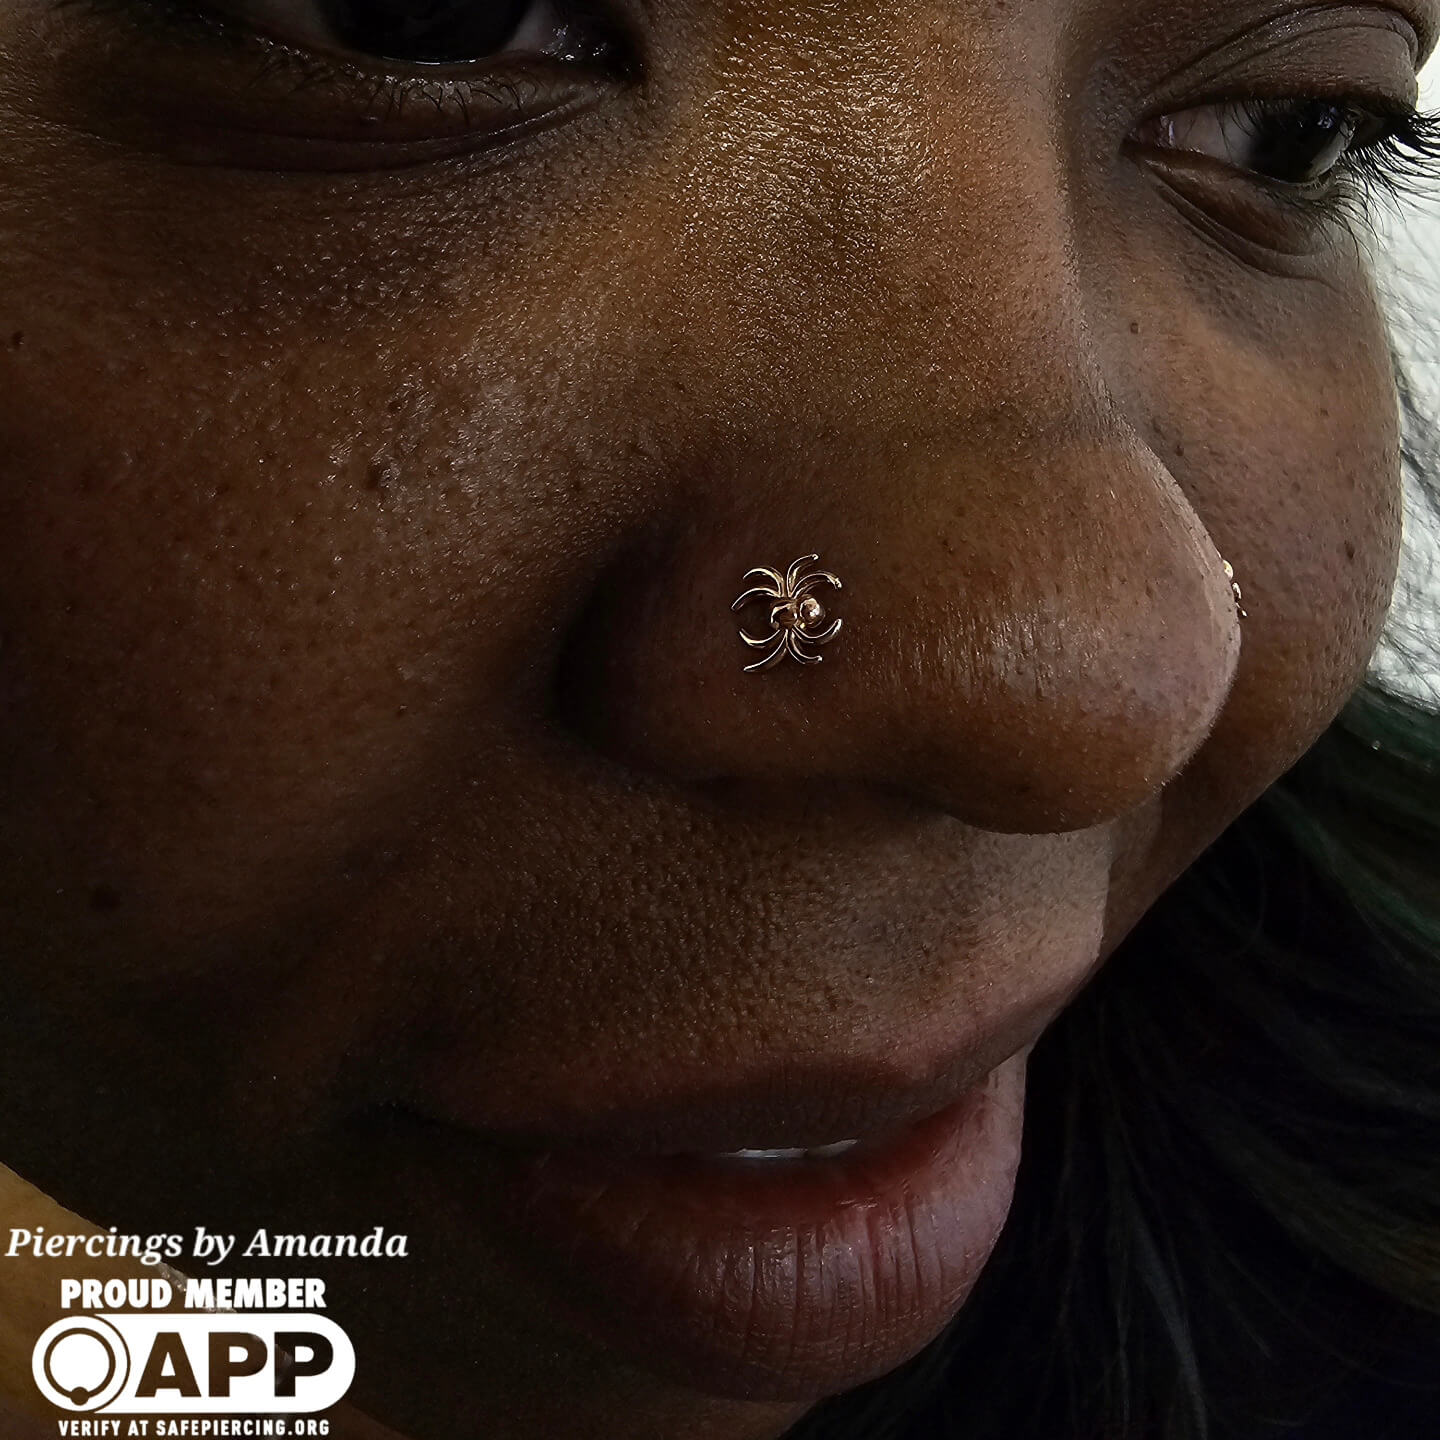 One healed and one fresh nostril piercings with gold spider